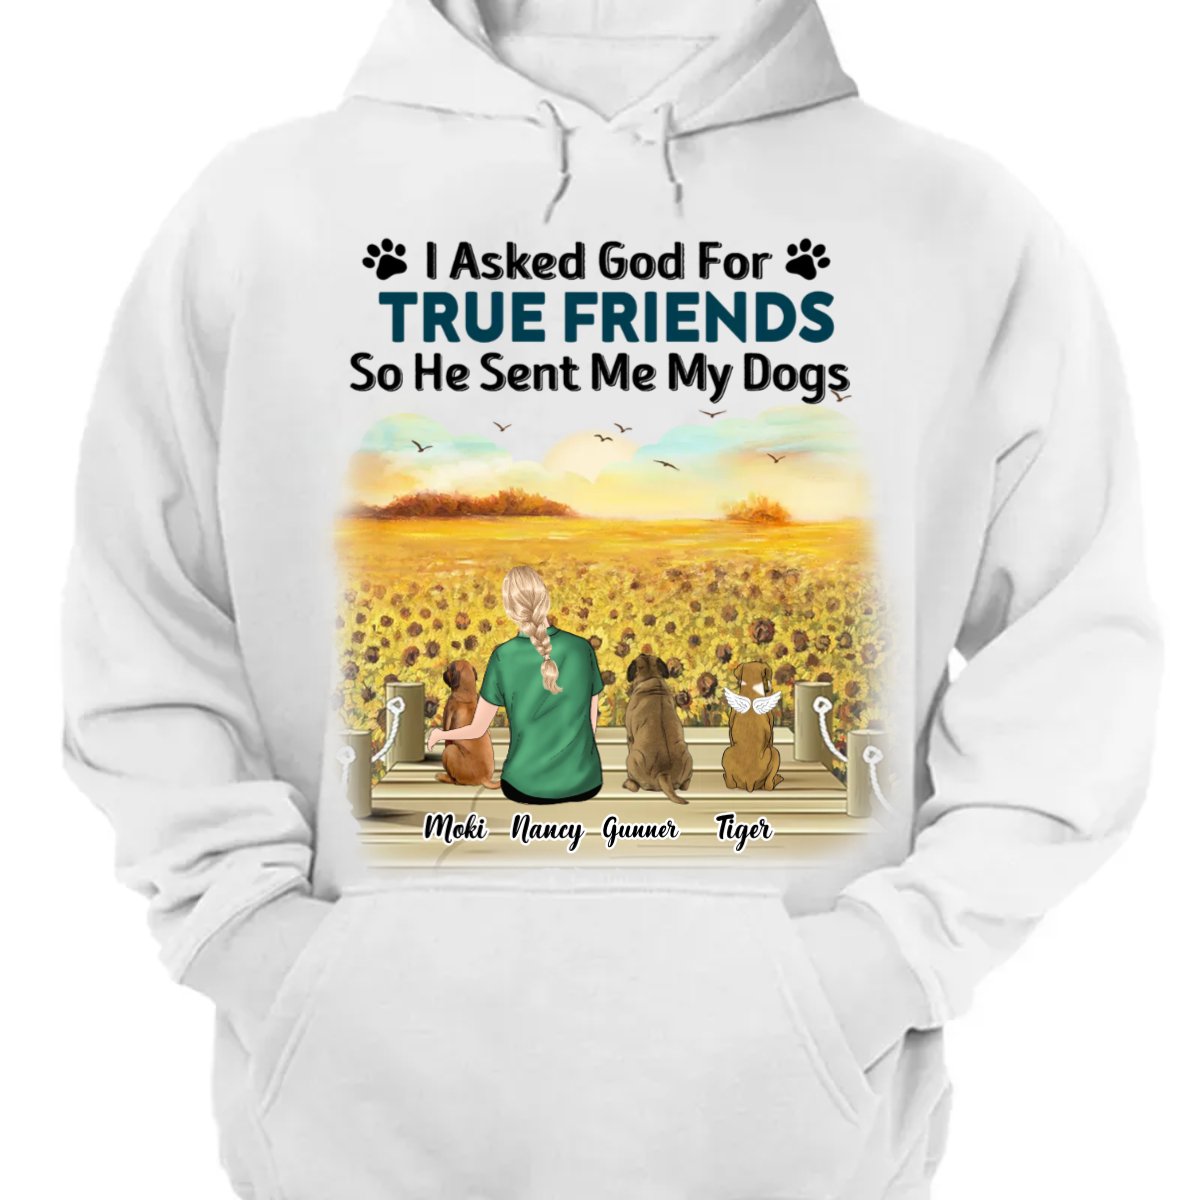 Dog Lovers - I Asked God For A True Friend - Personalized Unisex T - shirt, Hoodie, Sweatshirt - The Next Custom Gift